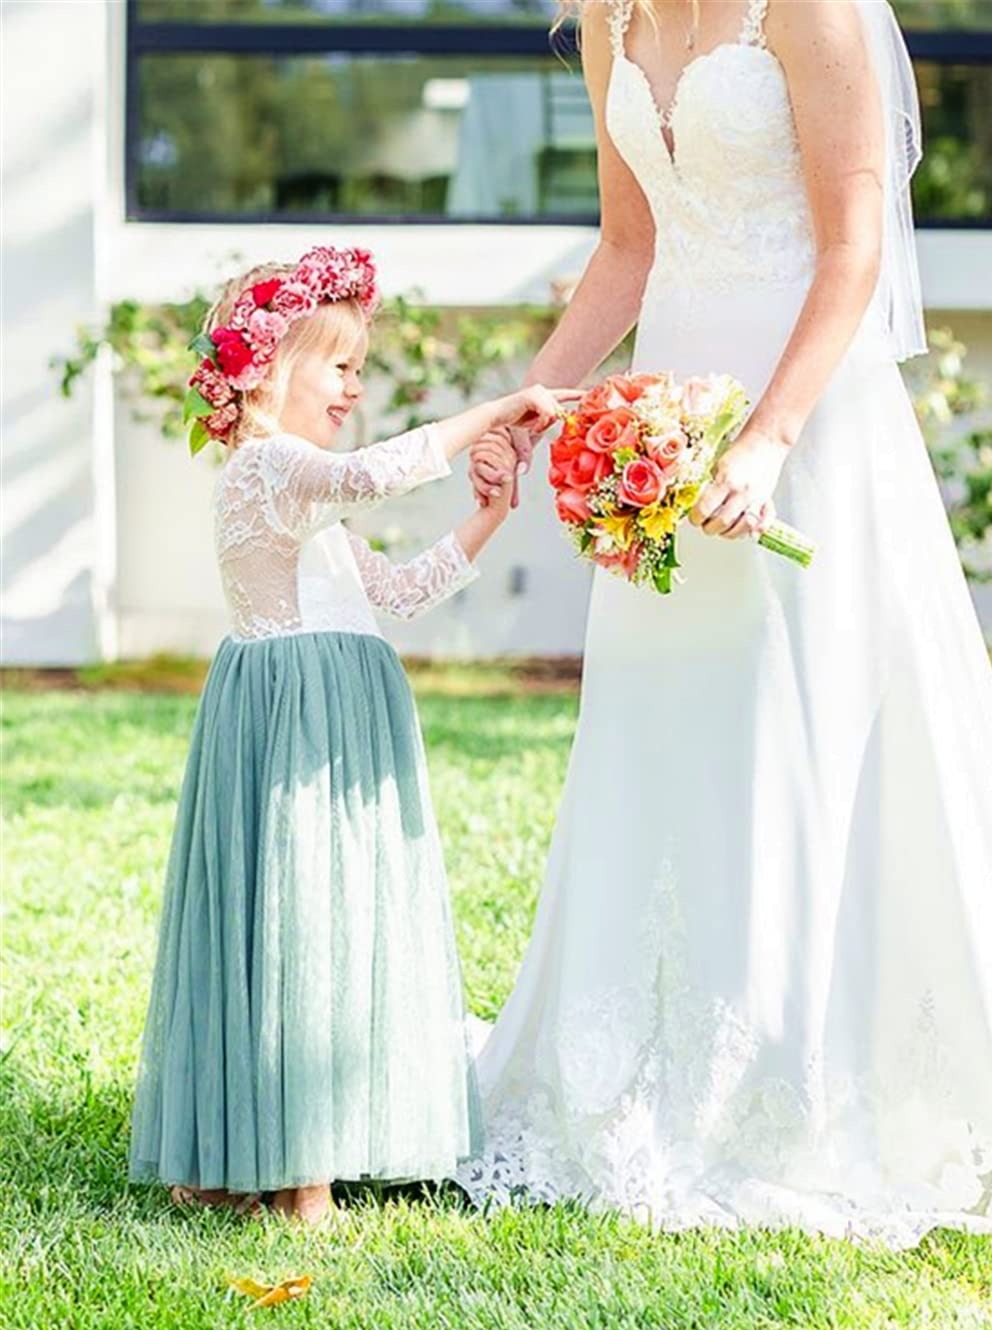 2Bunnies Flower Girl Dress Rose Lace Back A-Line Long Sleeve Straight Tulle Maxi (Sage) - 2BUNNIES